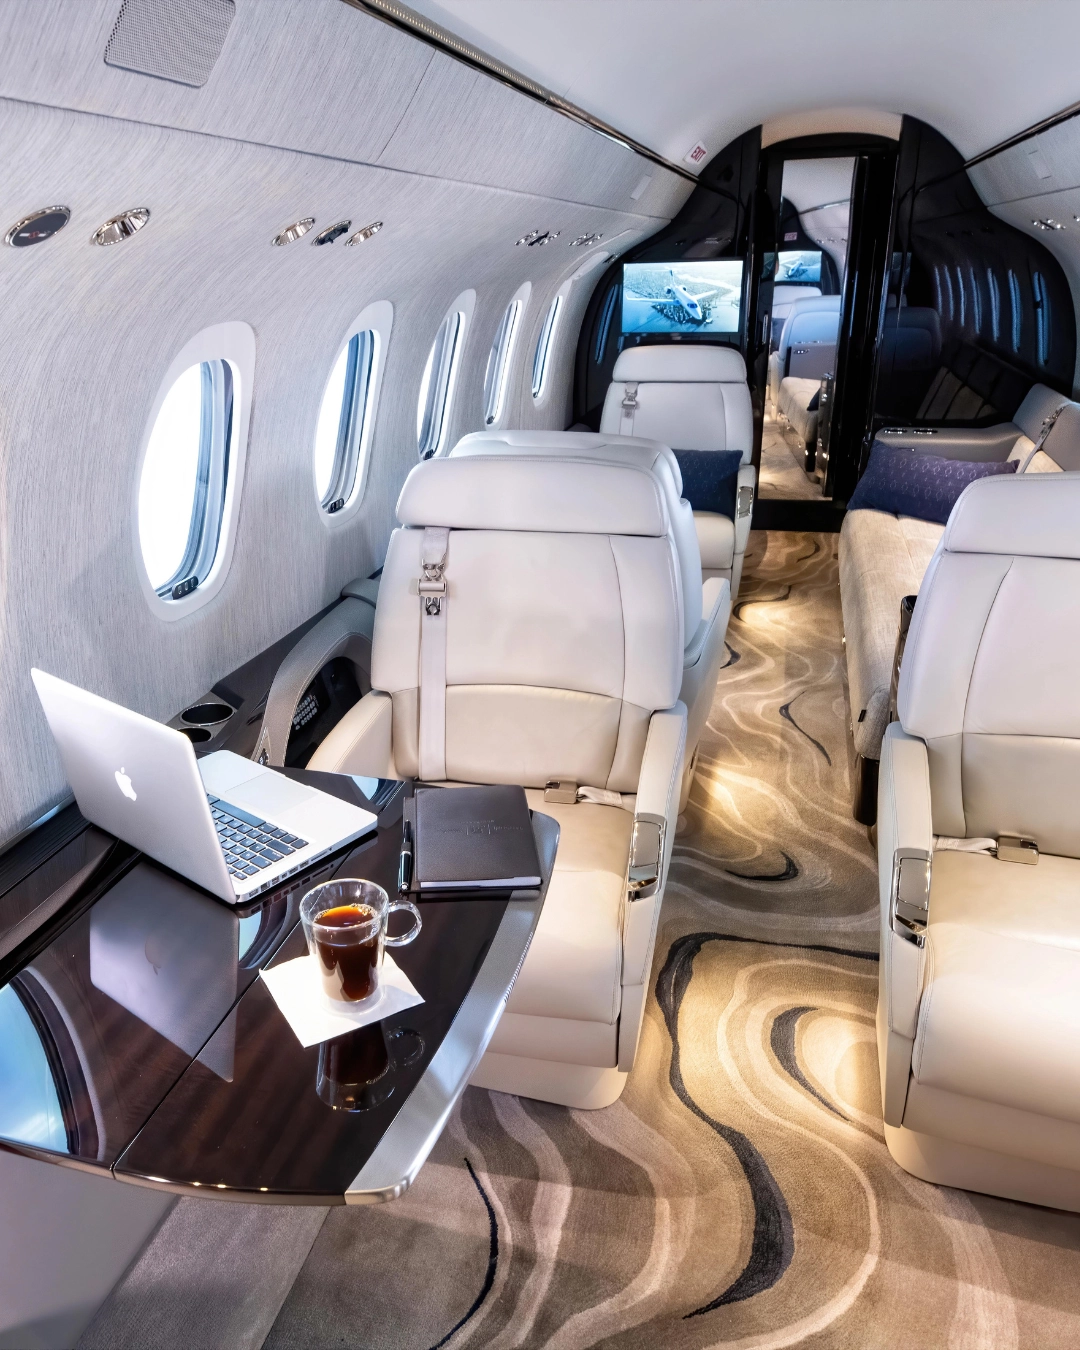 Travelling in a private Jet